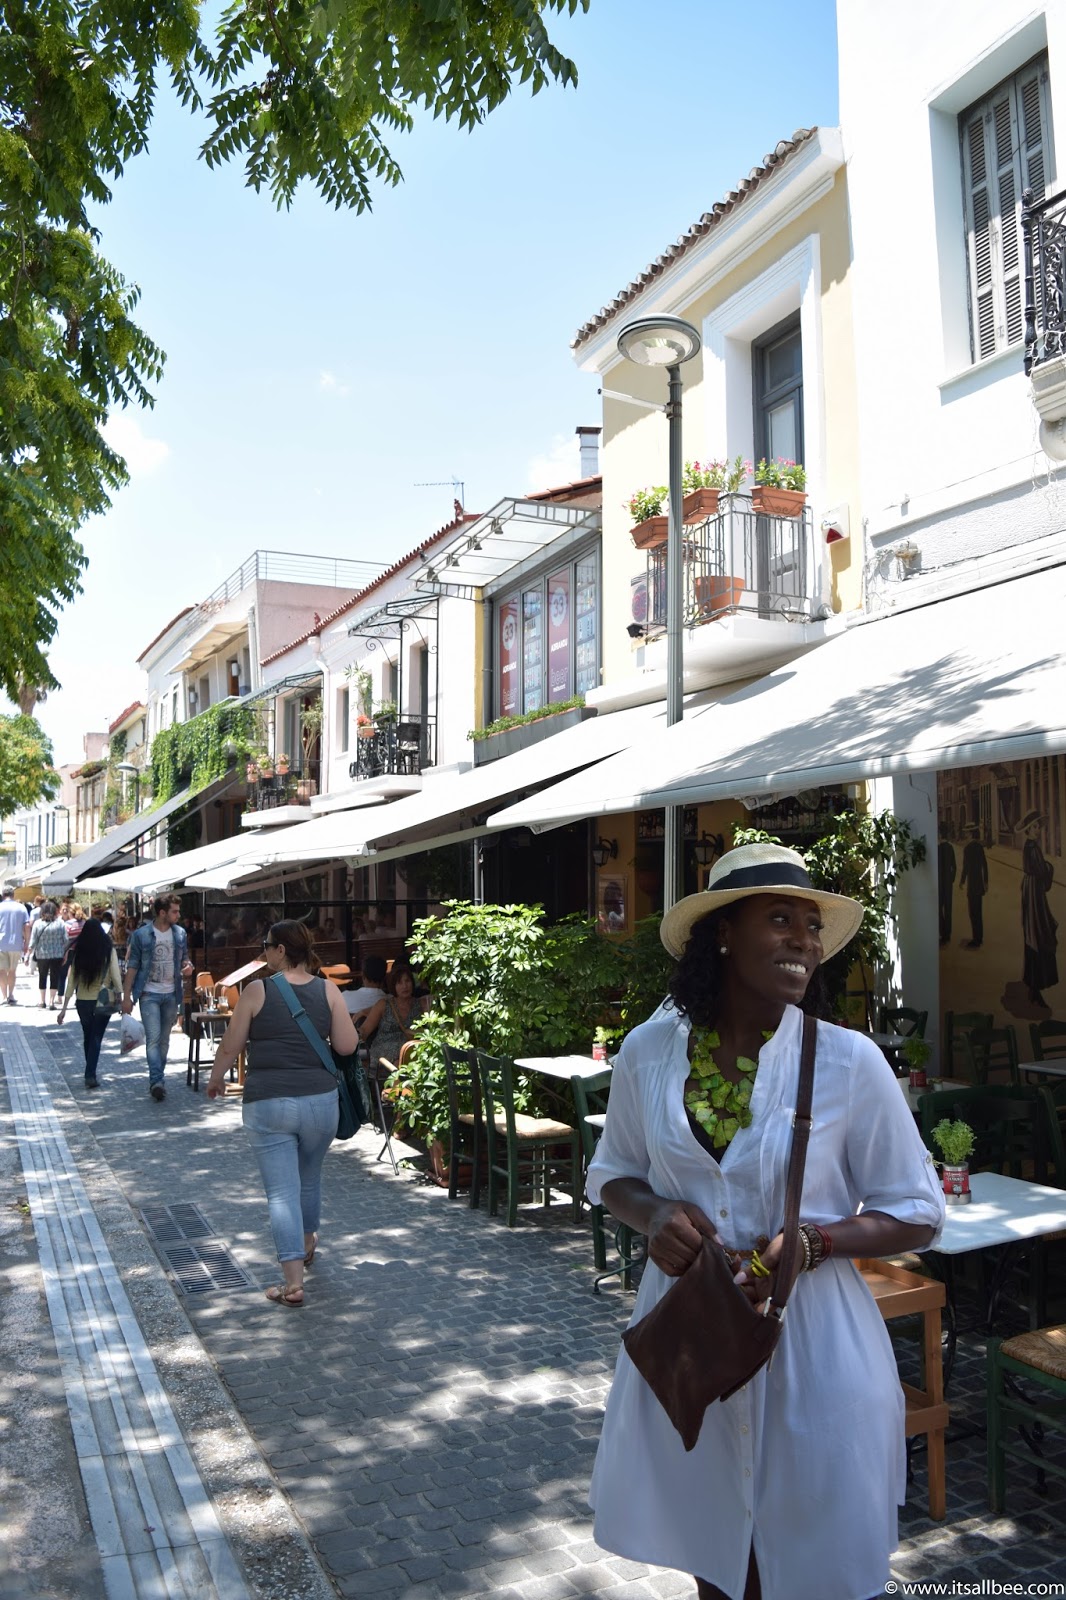 Guide to the best place to stay in Athens for sightseeing